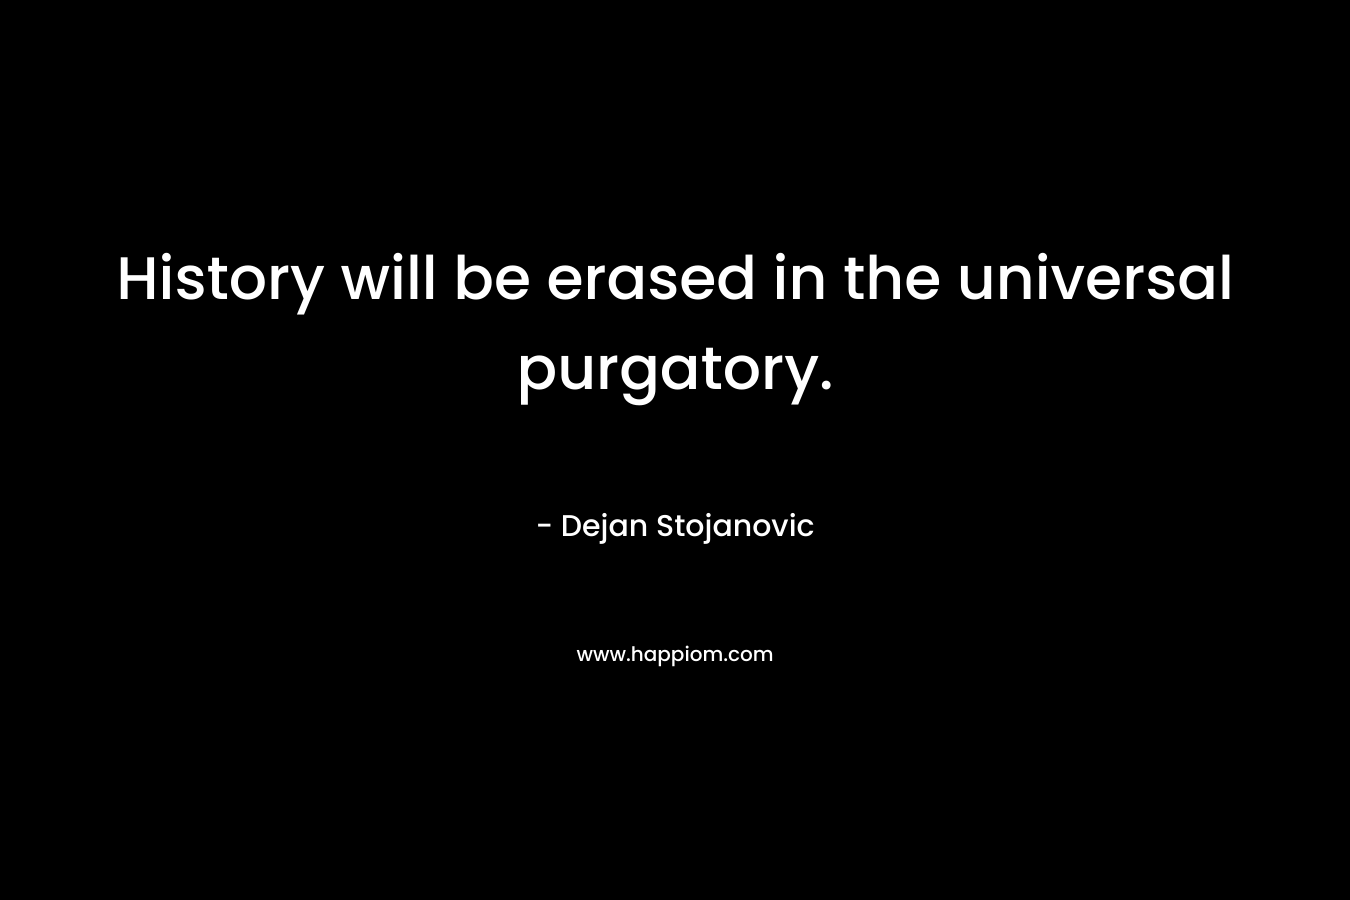 History will be erased in the universal purgatory.